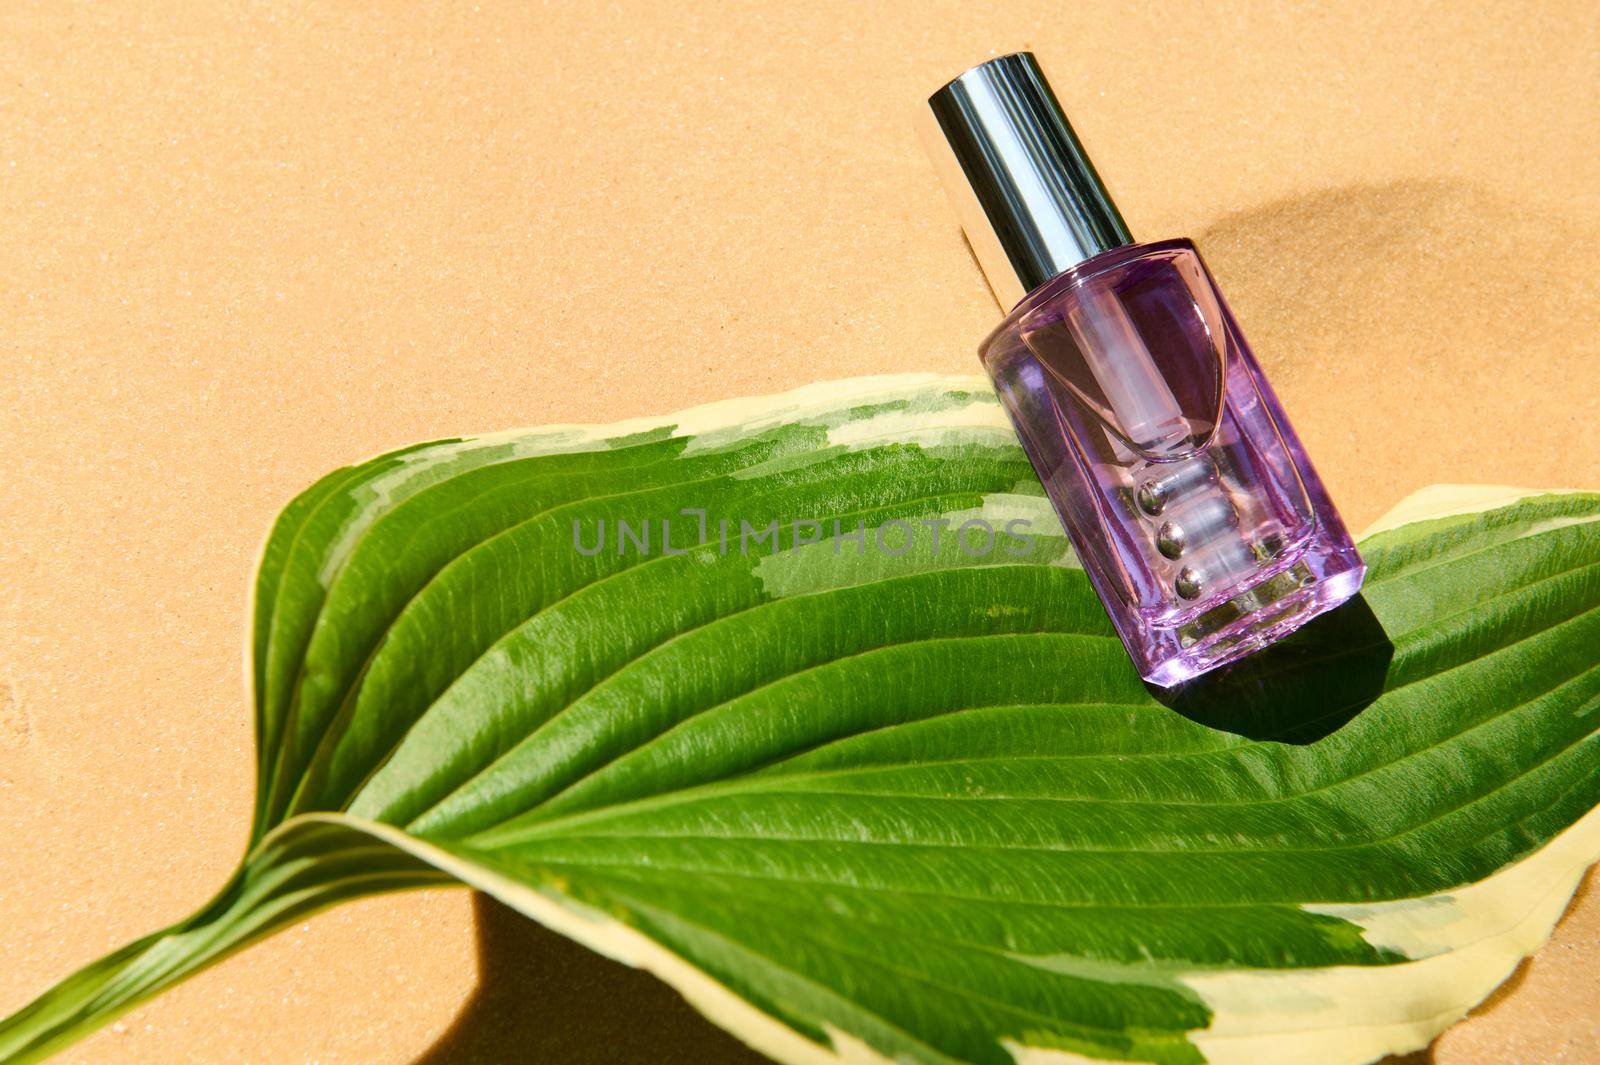 Light violet bottle with dropper of anti-aging, rejuvenating and nourishing skin care liquid cosmetic product on green leaf against sandy background. Minimalistic Beauty art still life. Copy ad space